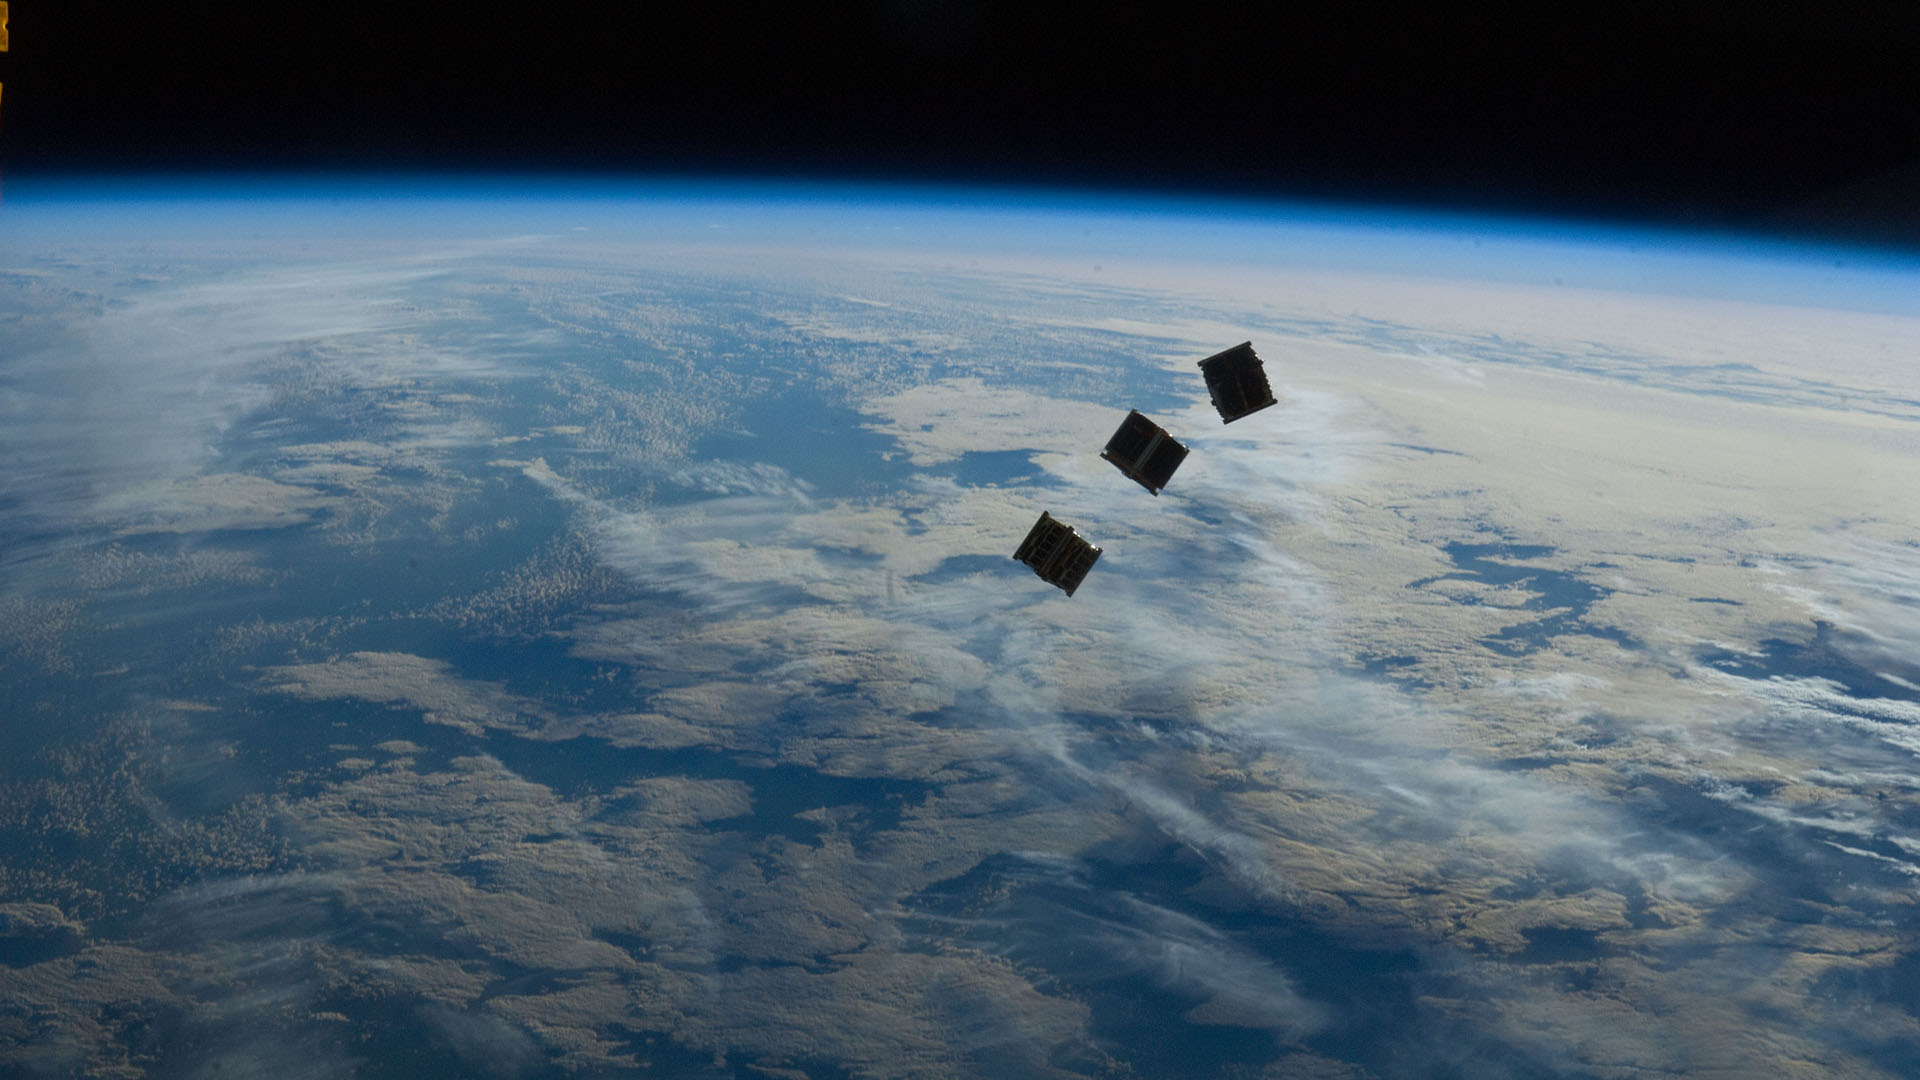 Three tiny satellites deployed from the International Space Station. Scientists warn satellites are becoming smaller and harder to track from Earth.